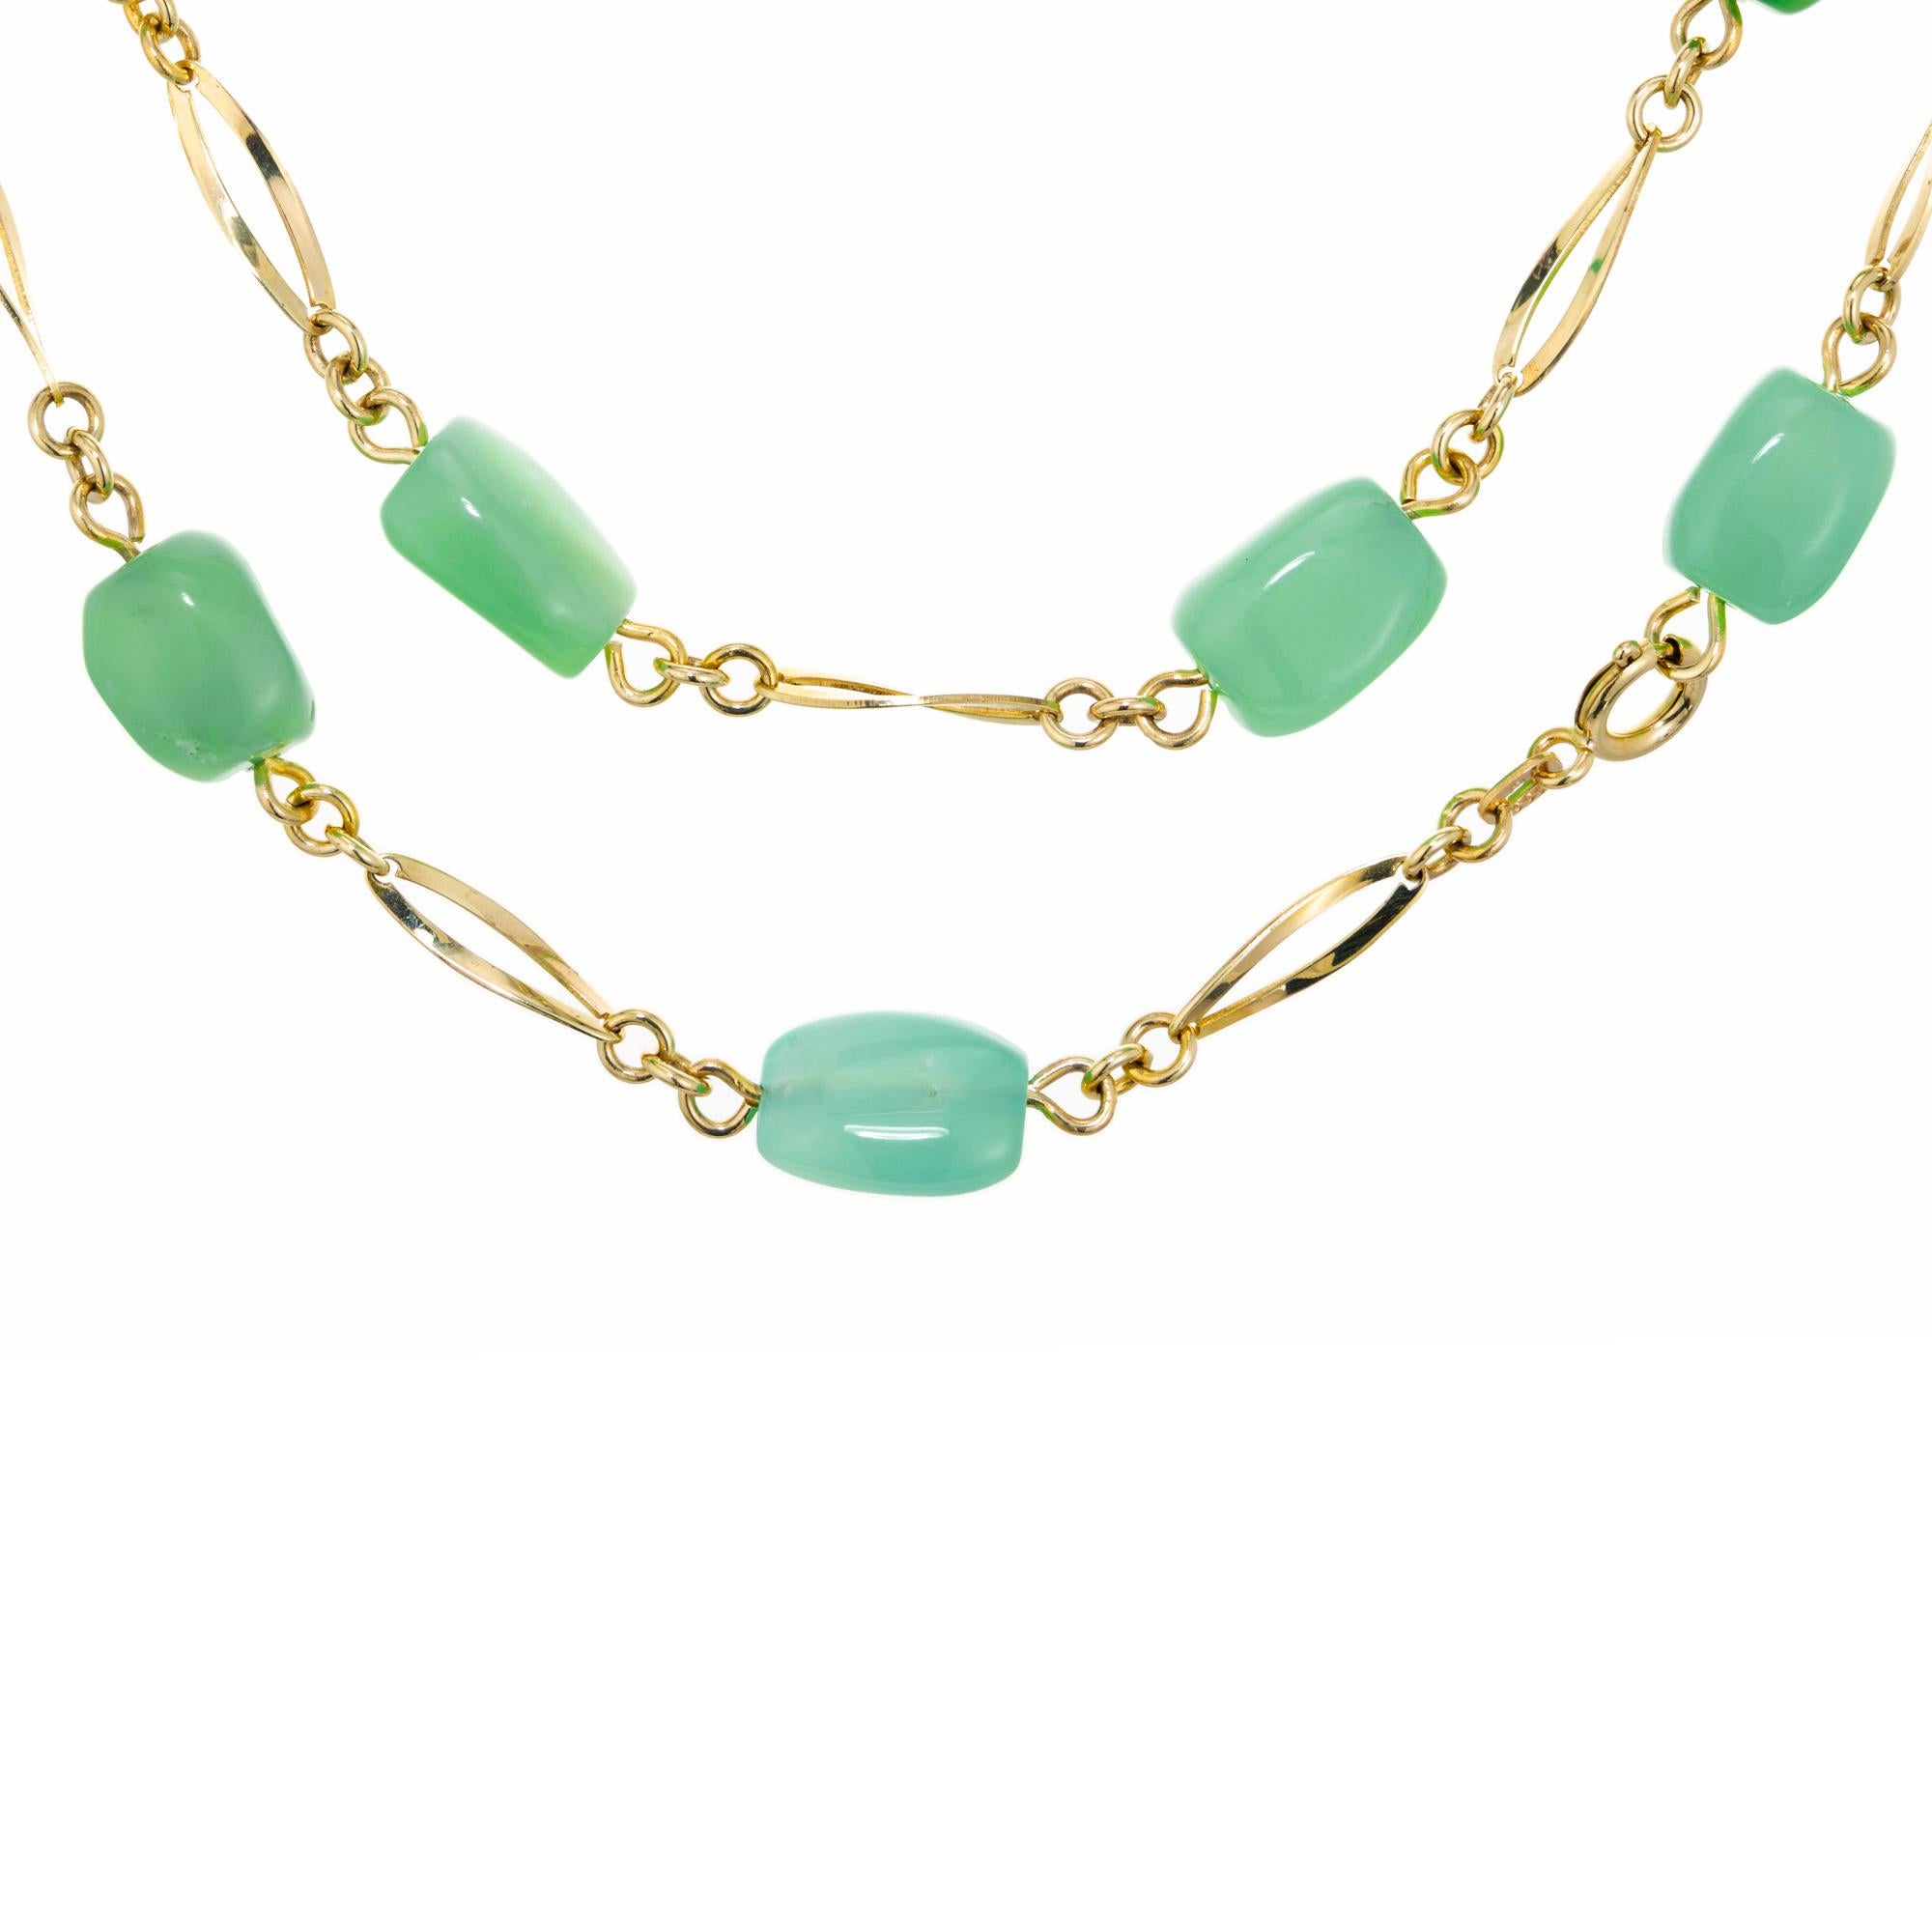 Unique and unusual green quartz necklace. 21 elongated green tumbled free form green quartz, connected by 8k yellow/green gold round and tear drop shape links. This beautiful piece originates from Scandinavia. Green gold of 8k purity (333 STAMPING).